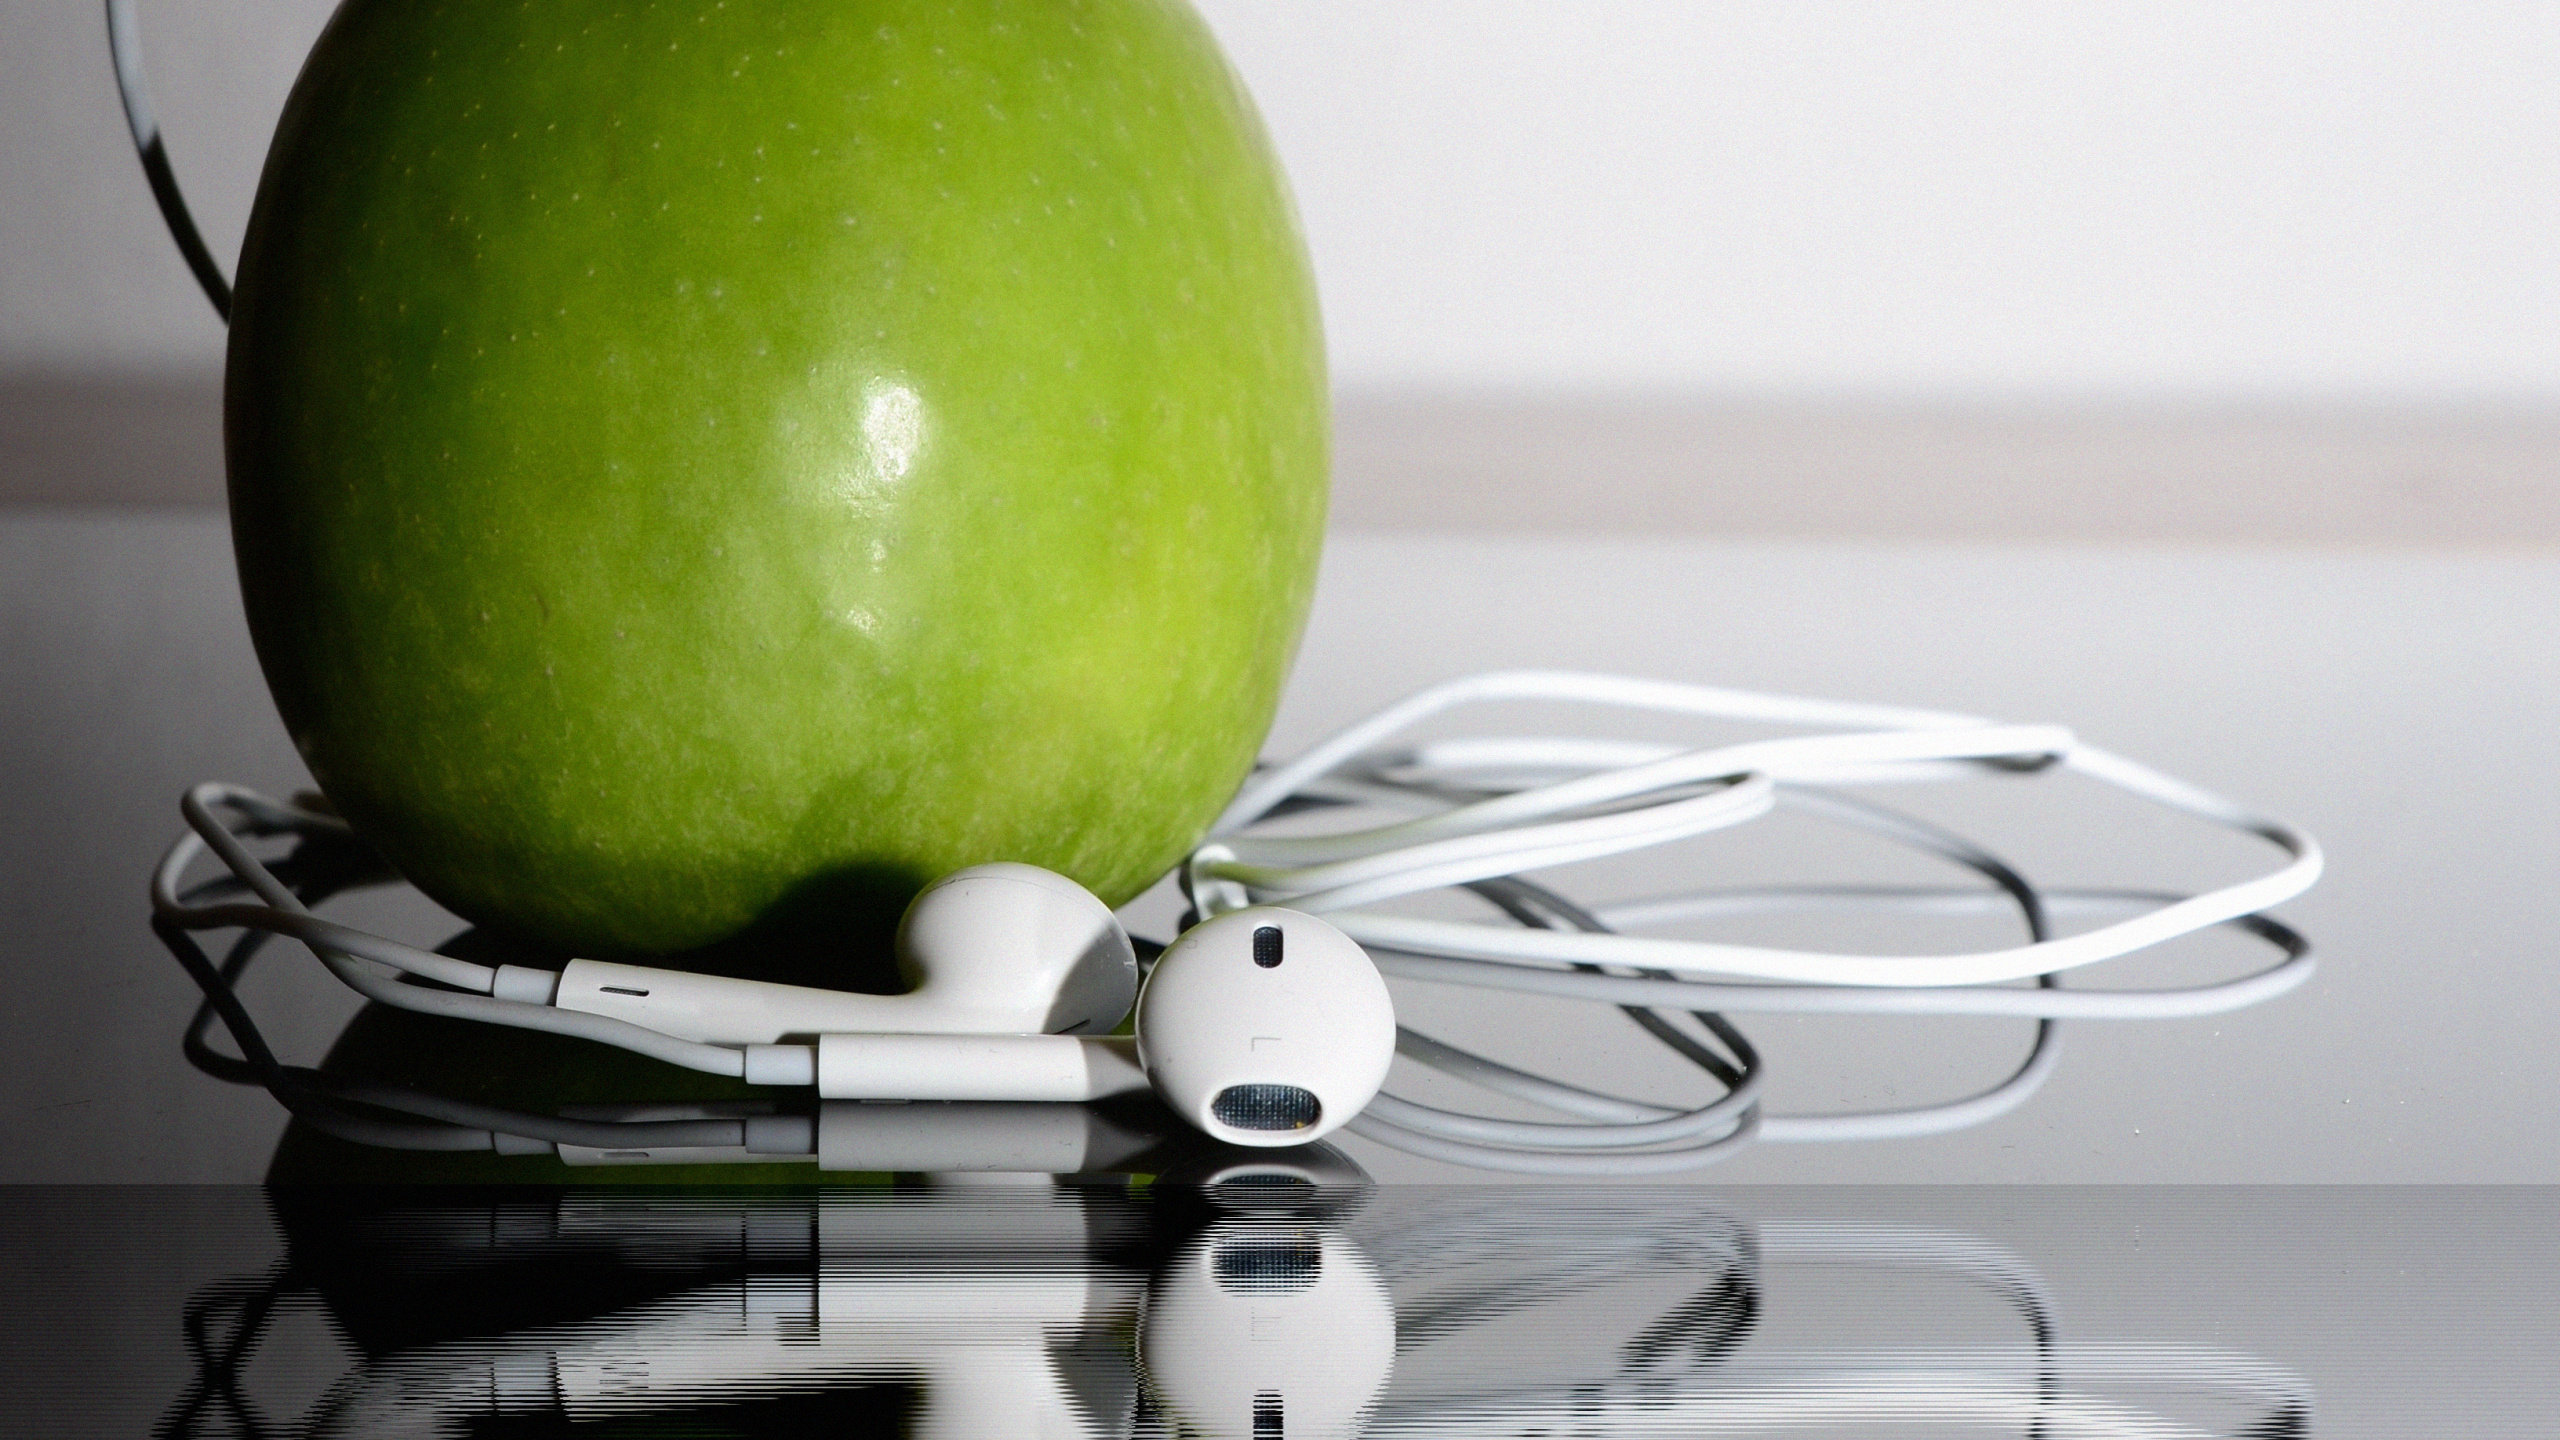 Apple Auriculares, Auriculares, Verde, Granny Smith, Apple. Wallpaper in 2560x1440 Resolution